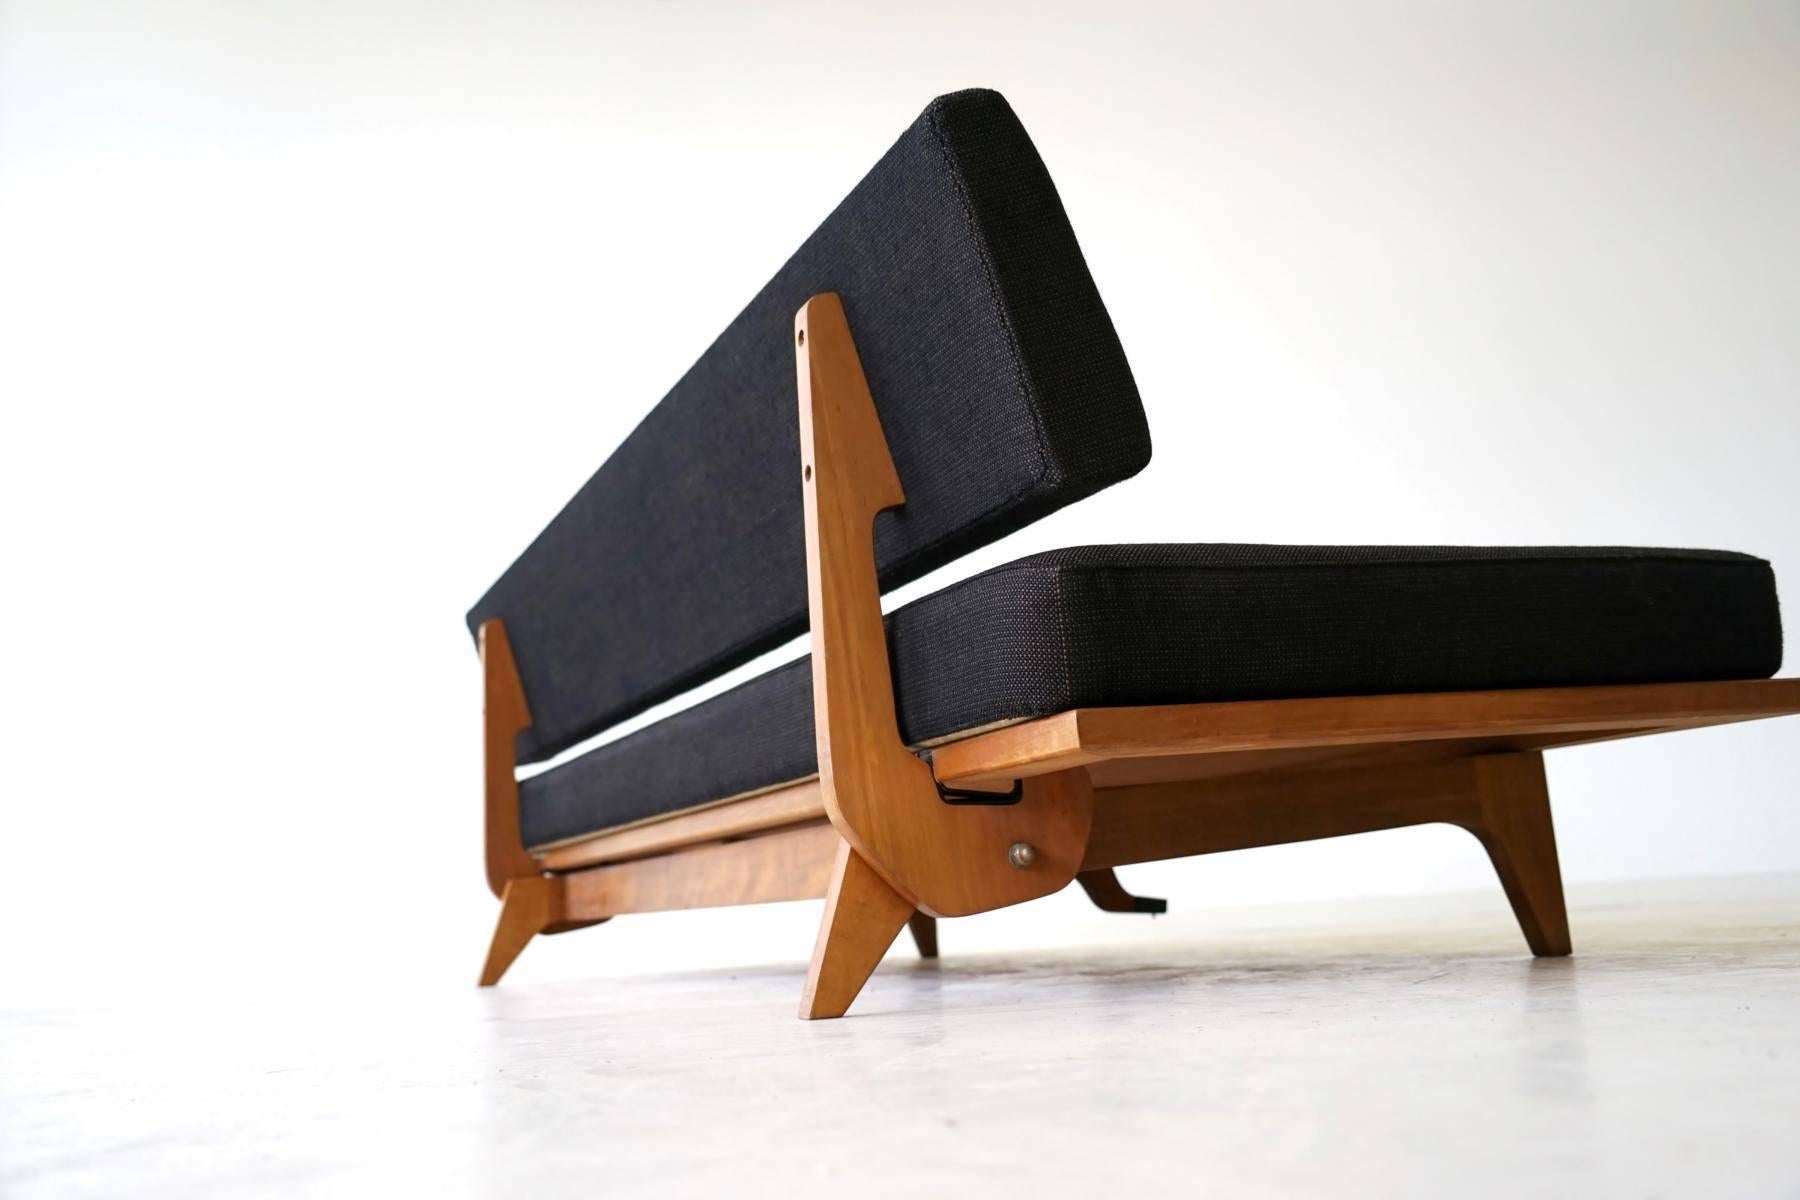 American Folding Sofa Daybed No. 700 by Richard Stein for Knoll International, 1947